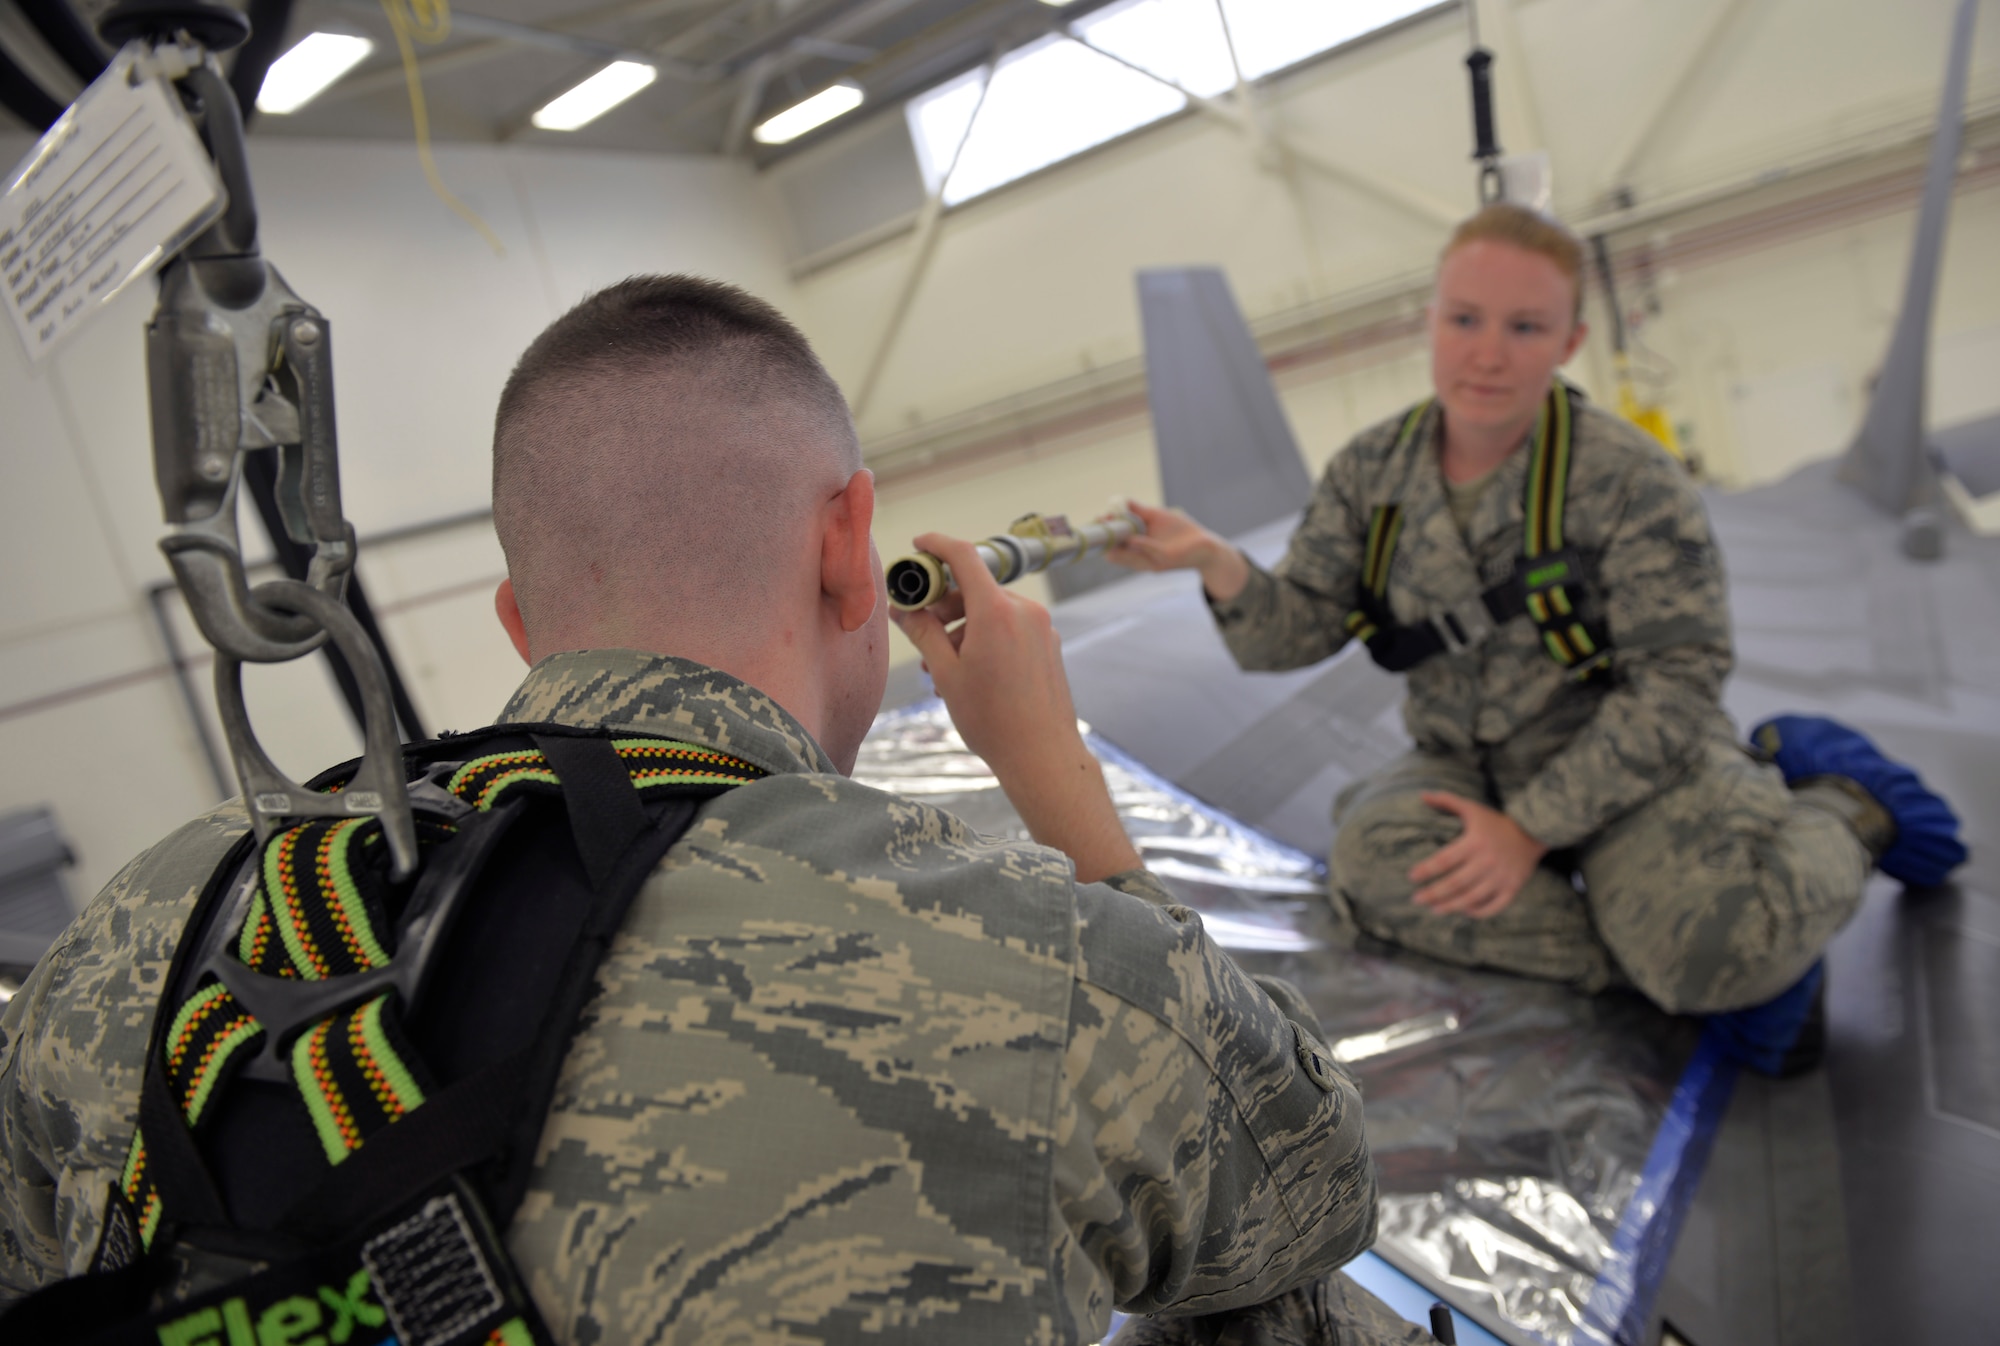 Airman 1st Class William Manion, 33rd Maintenance Squadron fuel systems apprentice, and Senior Airman Samantha Schmedeke, 33rd MXS fuel systems journeyman, ensure a fuel probe is clear of debris  before use at Eglin Air Force Base, Fla., May 16, 2016. This tool is used to check the fuel level of an F-35A Lightning II after flight. (U.S. Air Force photo/Senior Airman Andrea Posey)